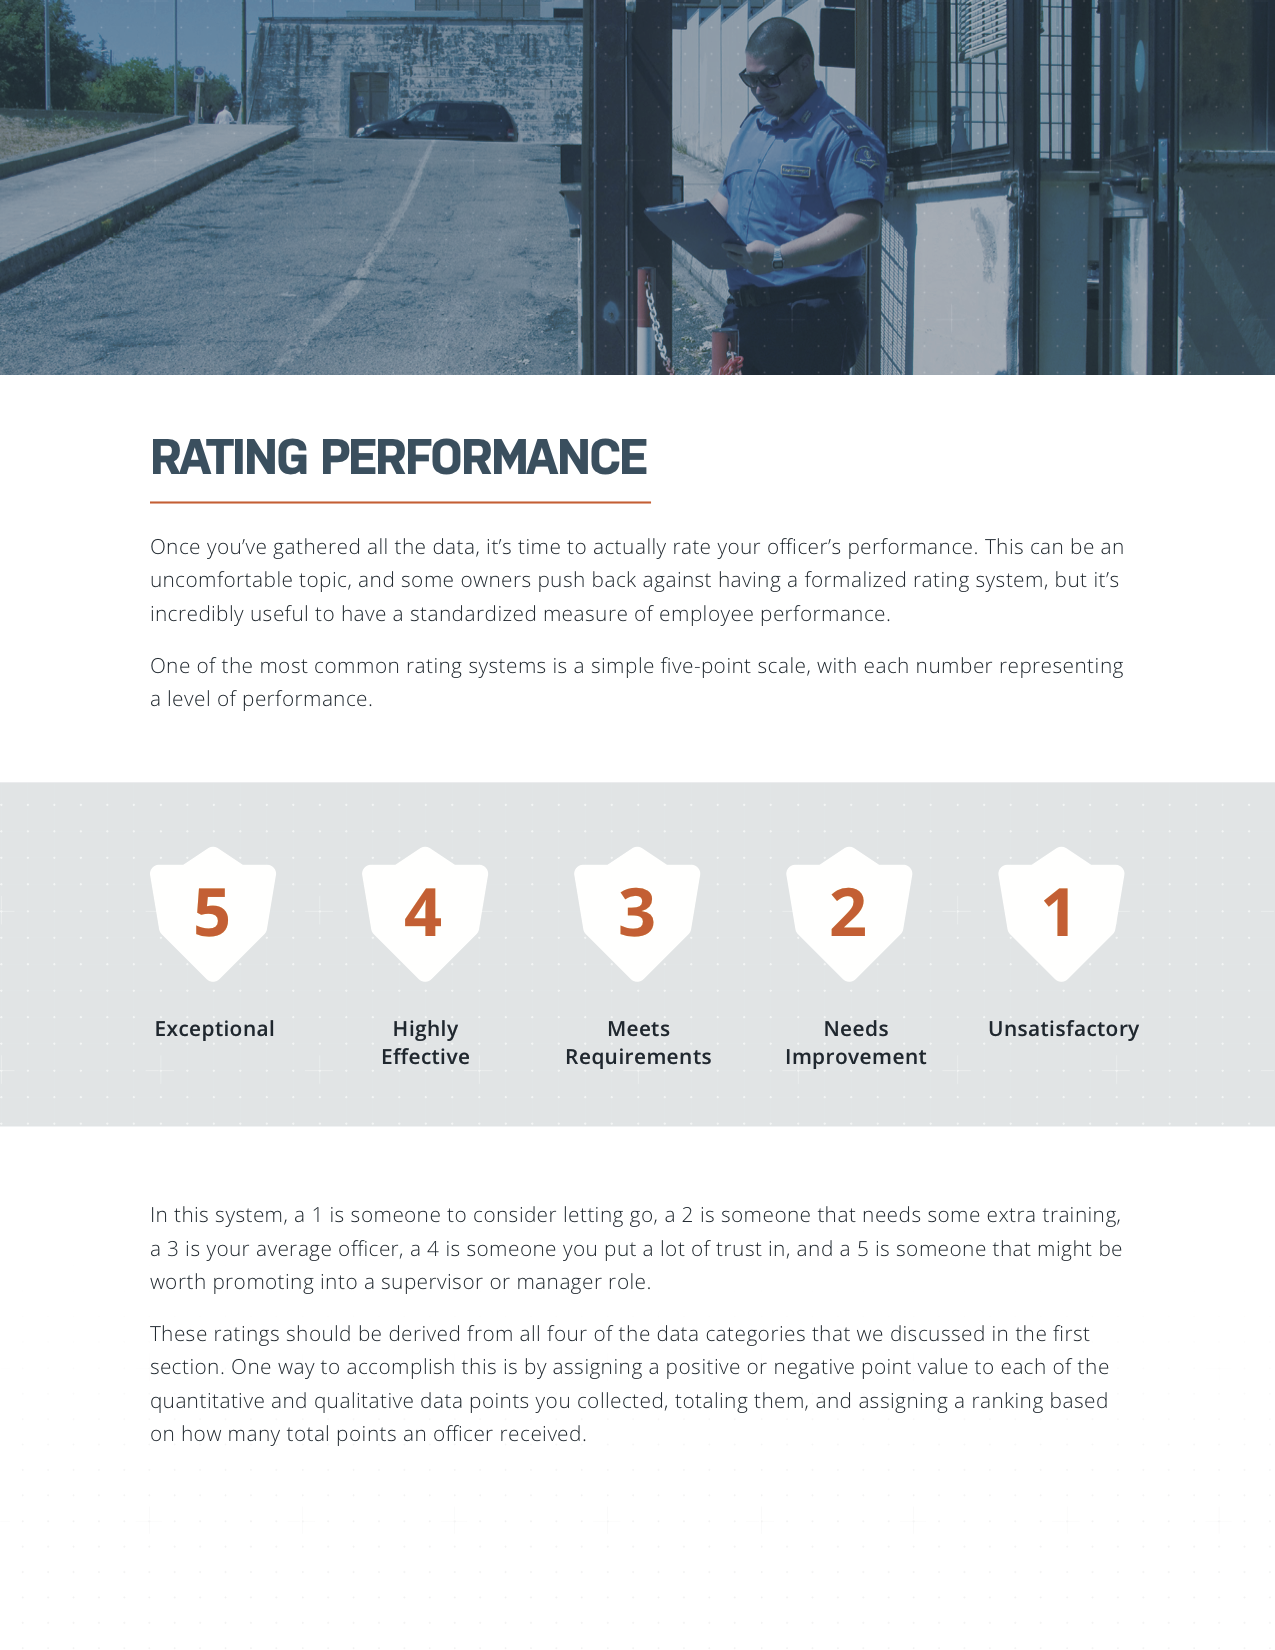 Evaluating Officer Performance eBook Page 2